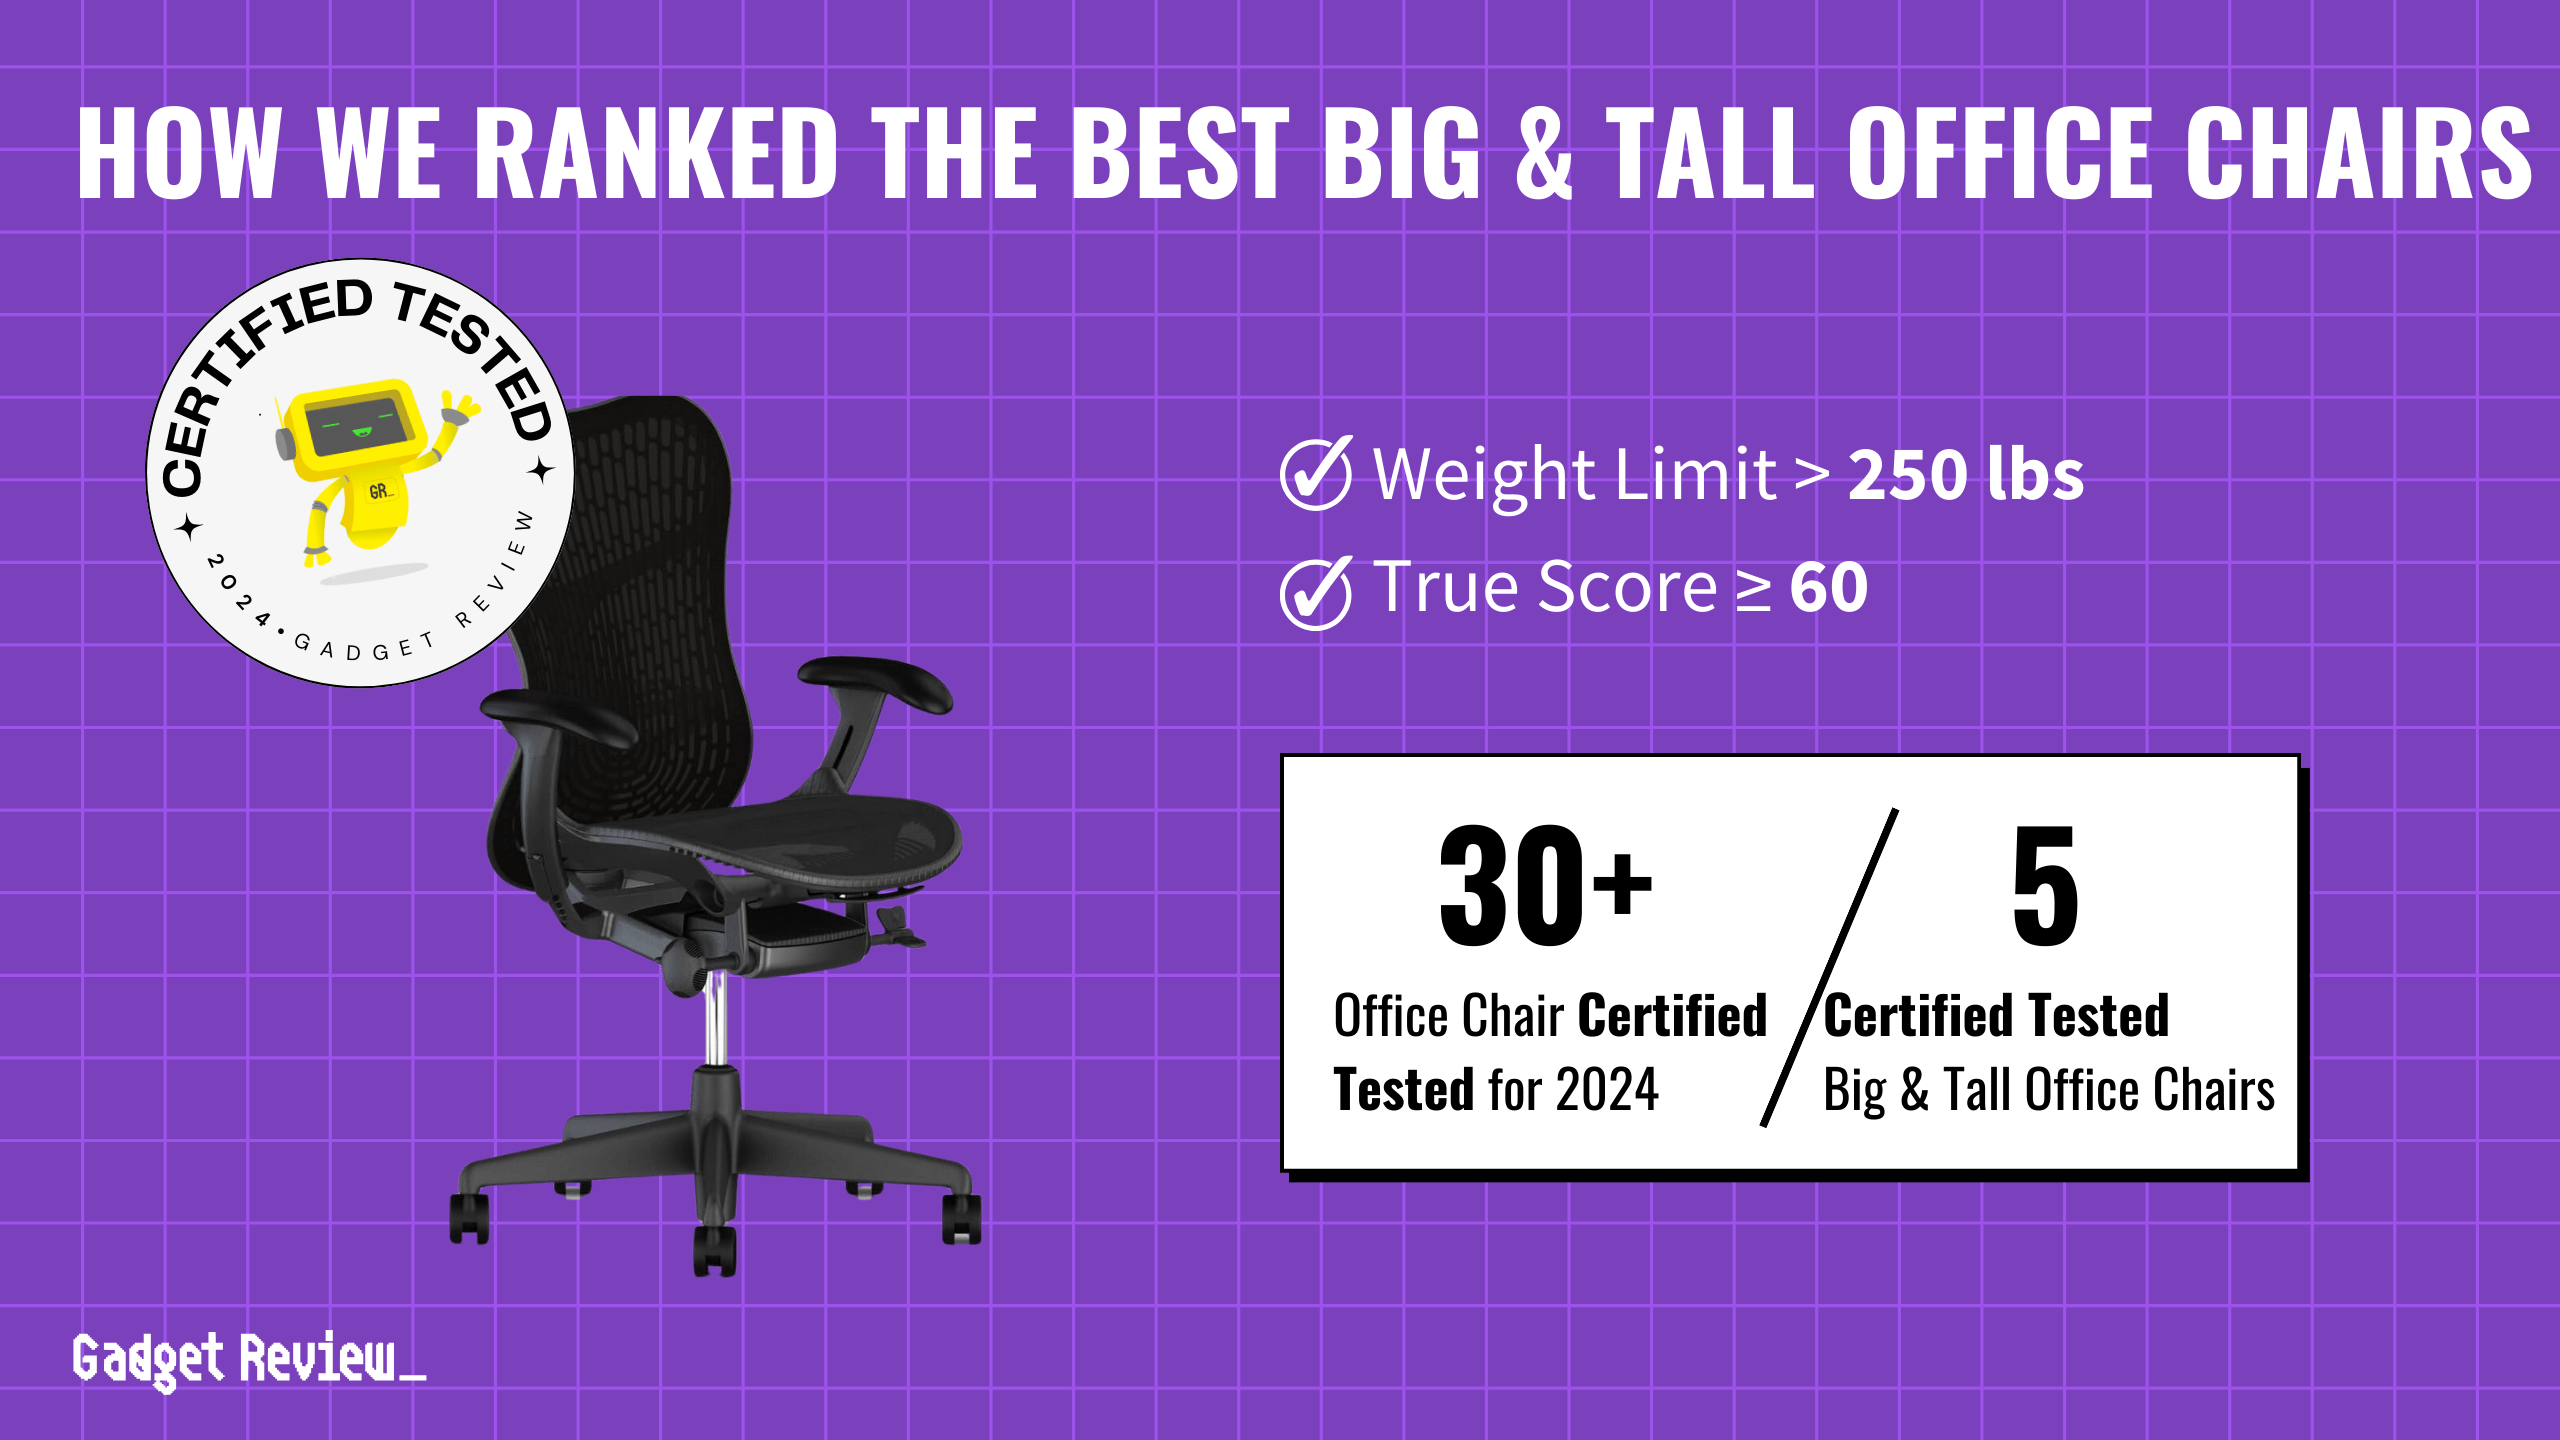 5 Top Big & Tall Office Chairs of 2024 Ranked